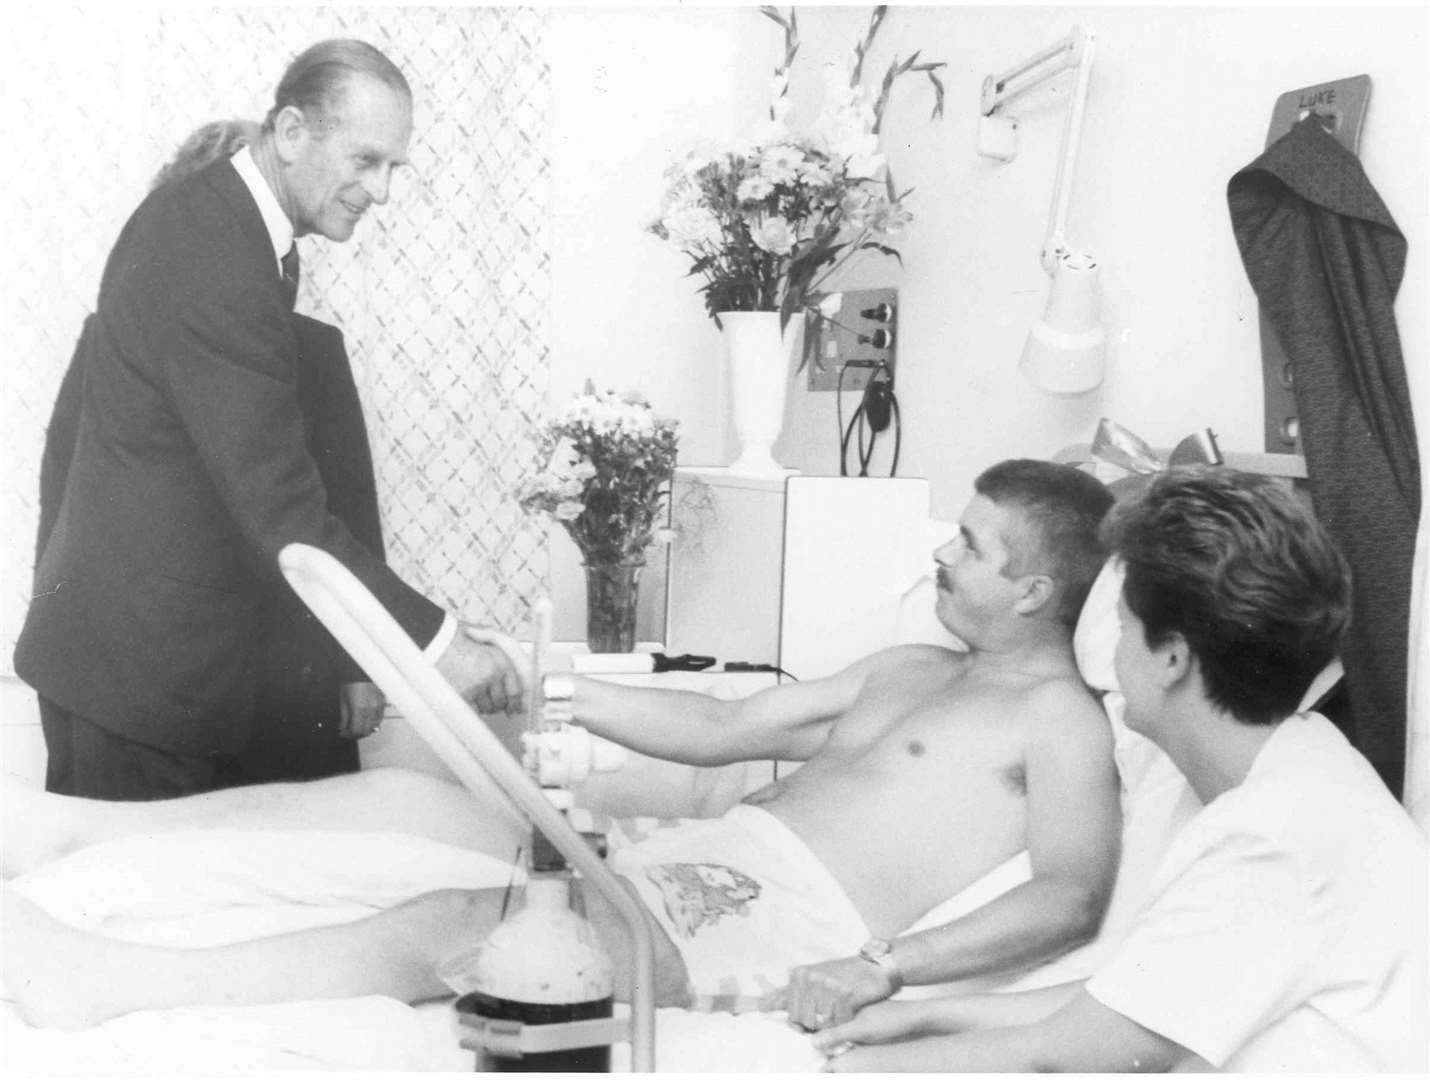 The Duke of Edinburgh visits the bedside of one of those injured in the Deal blast